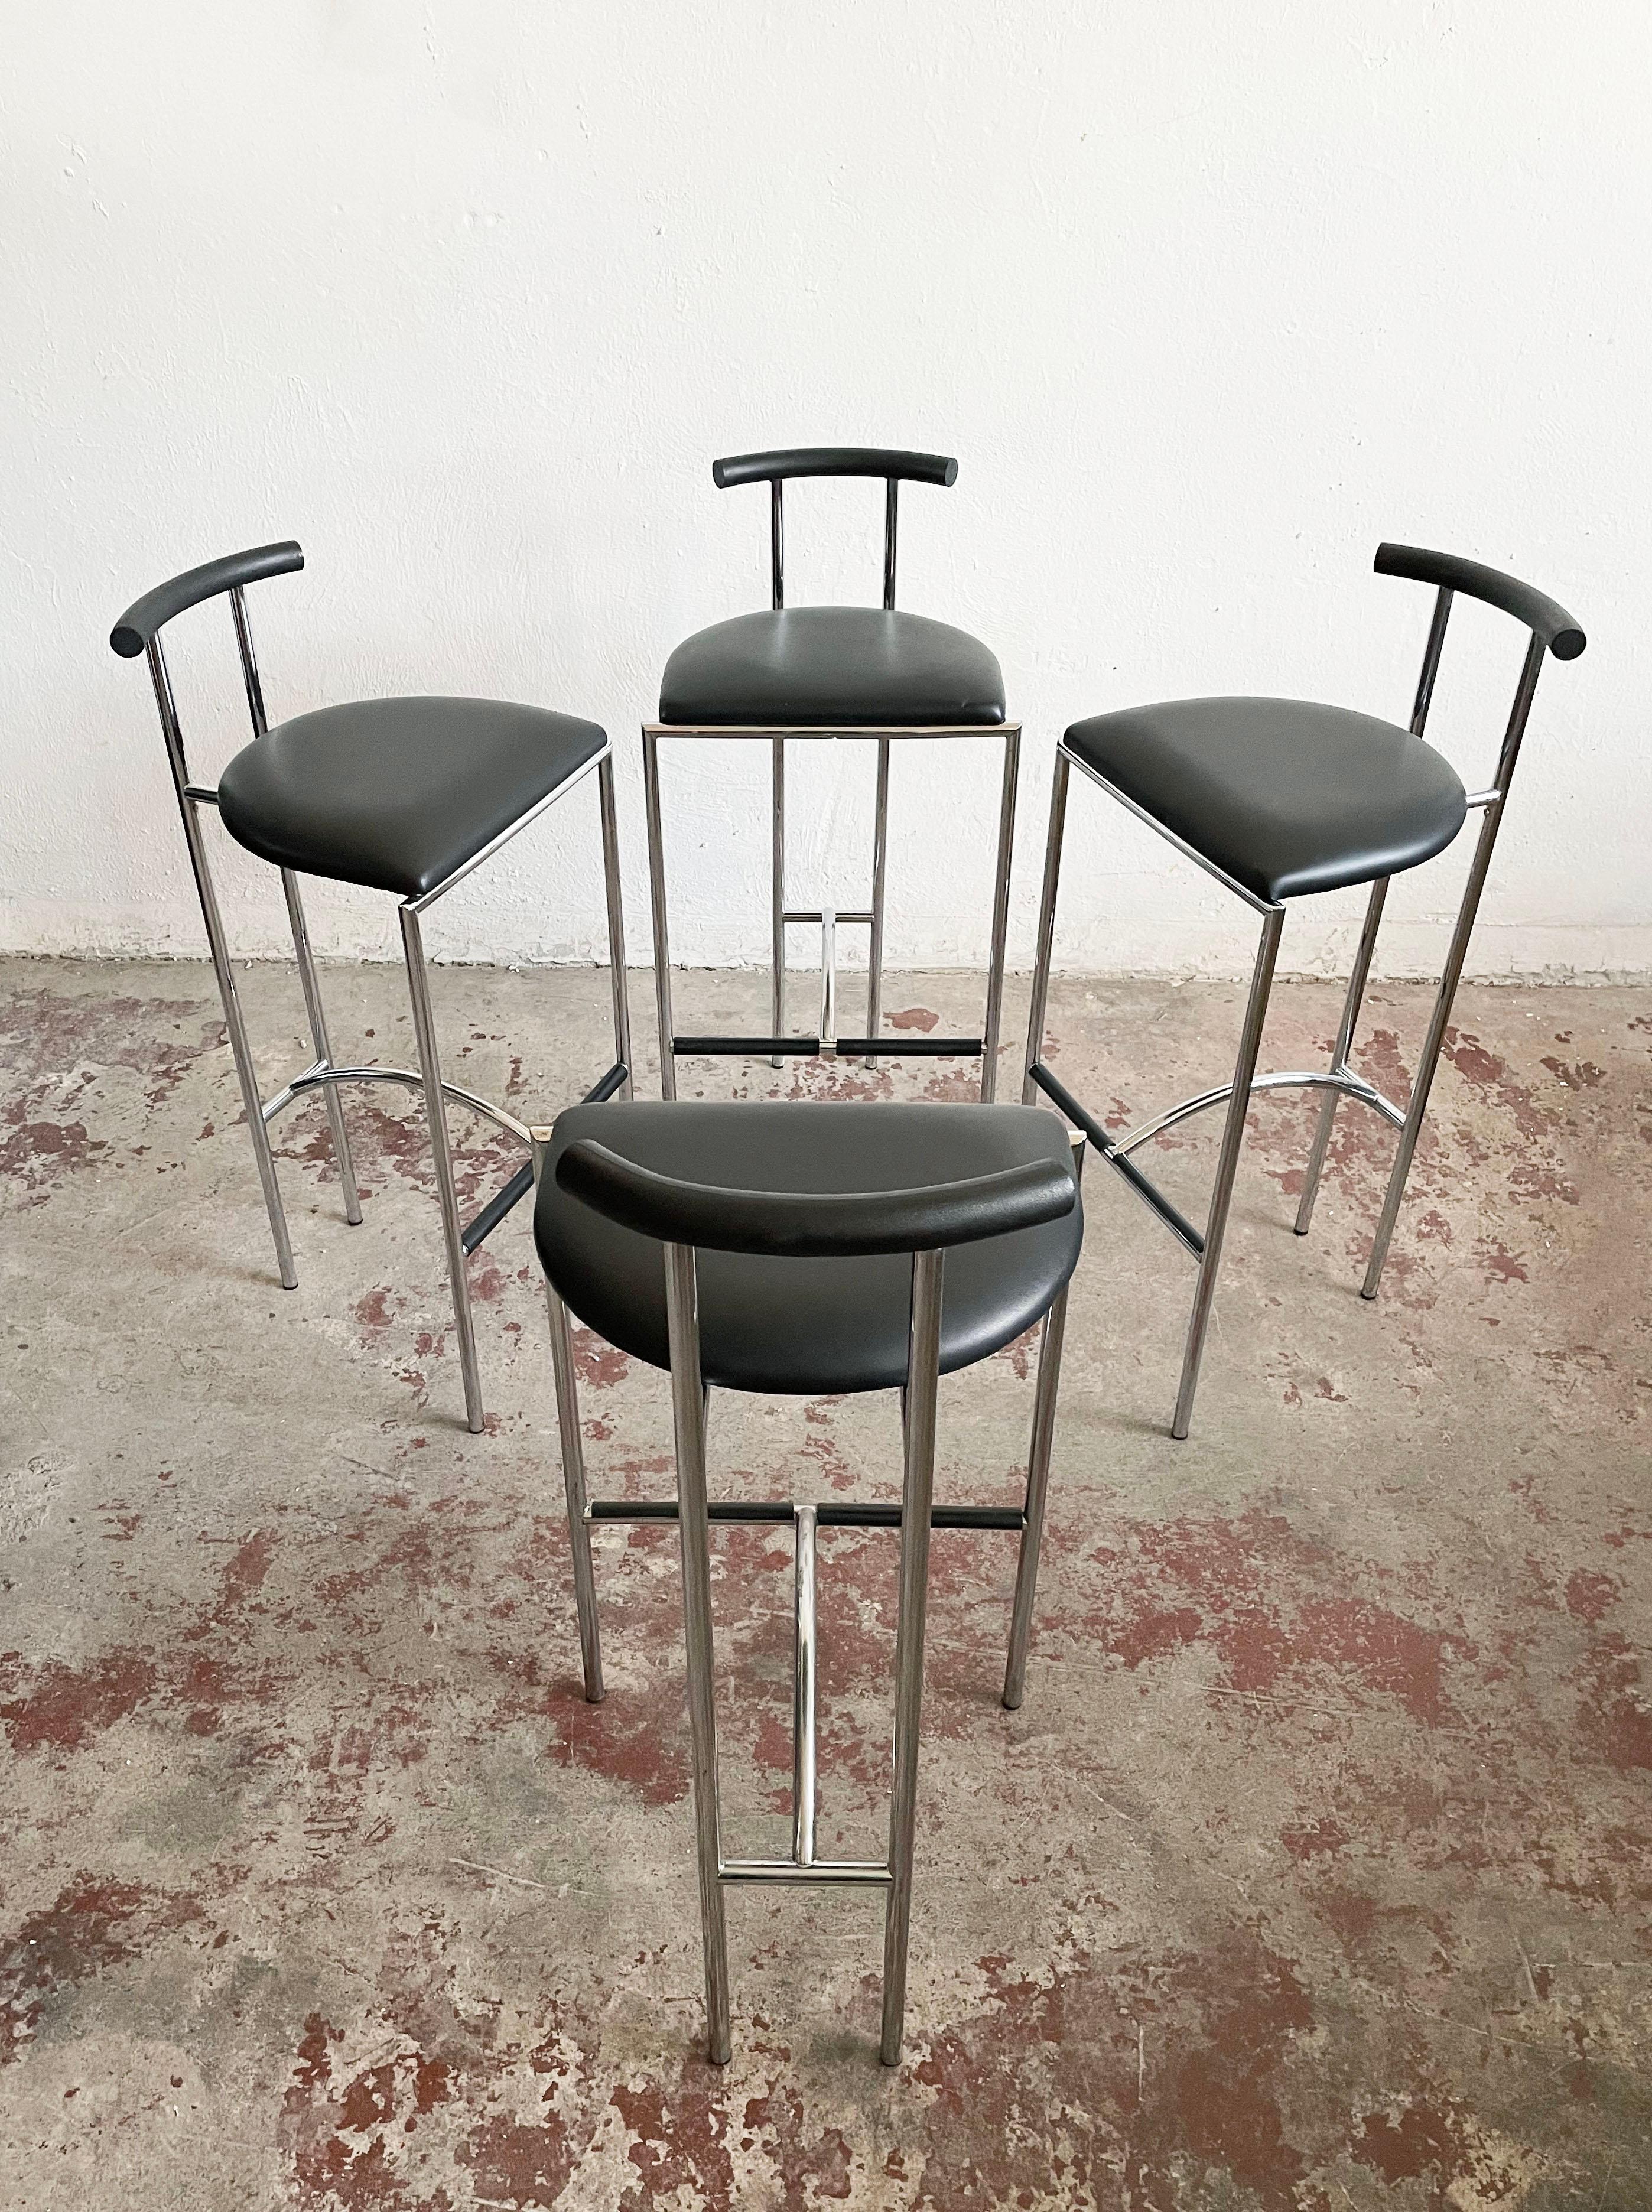 Sculptural Tokyo bar stools are iconic for the 1980s. Designed in postmodern style by Rodney Kinsman and produced by Bieffeplast. Italy. The stools were originally designed for London’s Groucho club.

Stools feature a minimalist steel frame and a